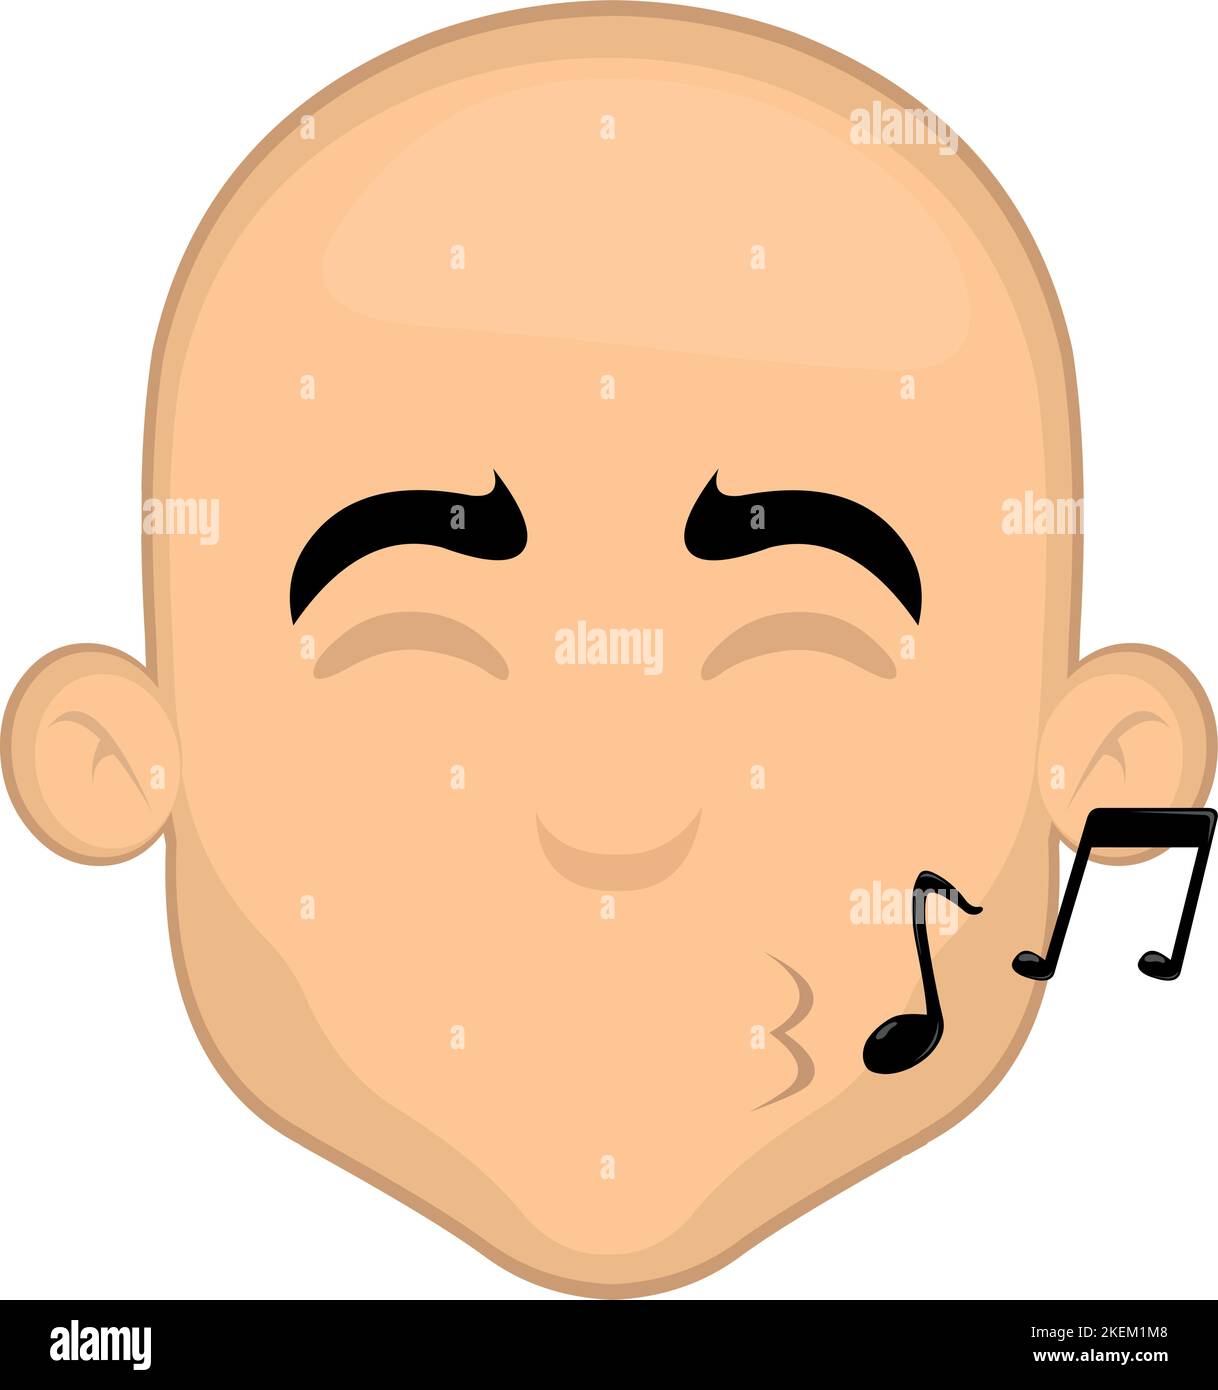 Vector illustration of a cartoon bald man face whistling with musical notes Stock Vector